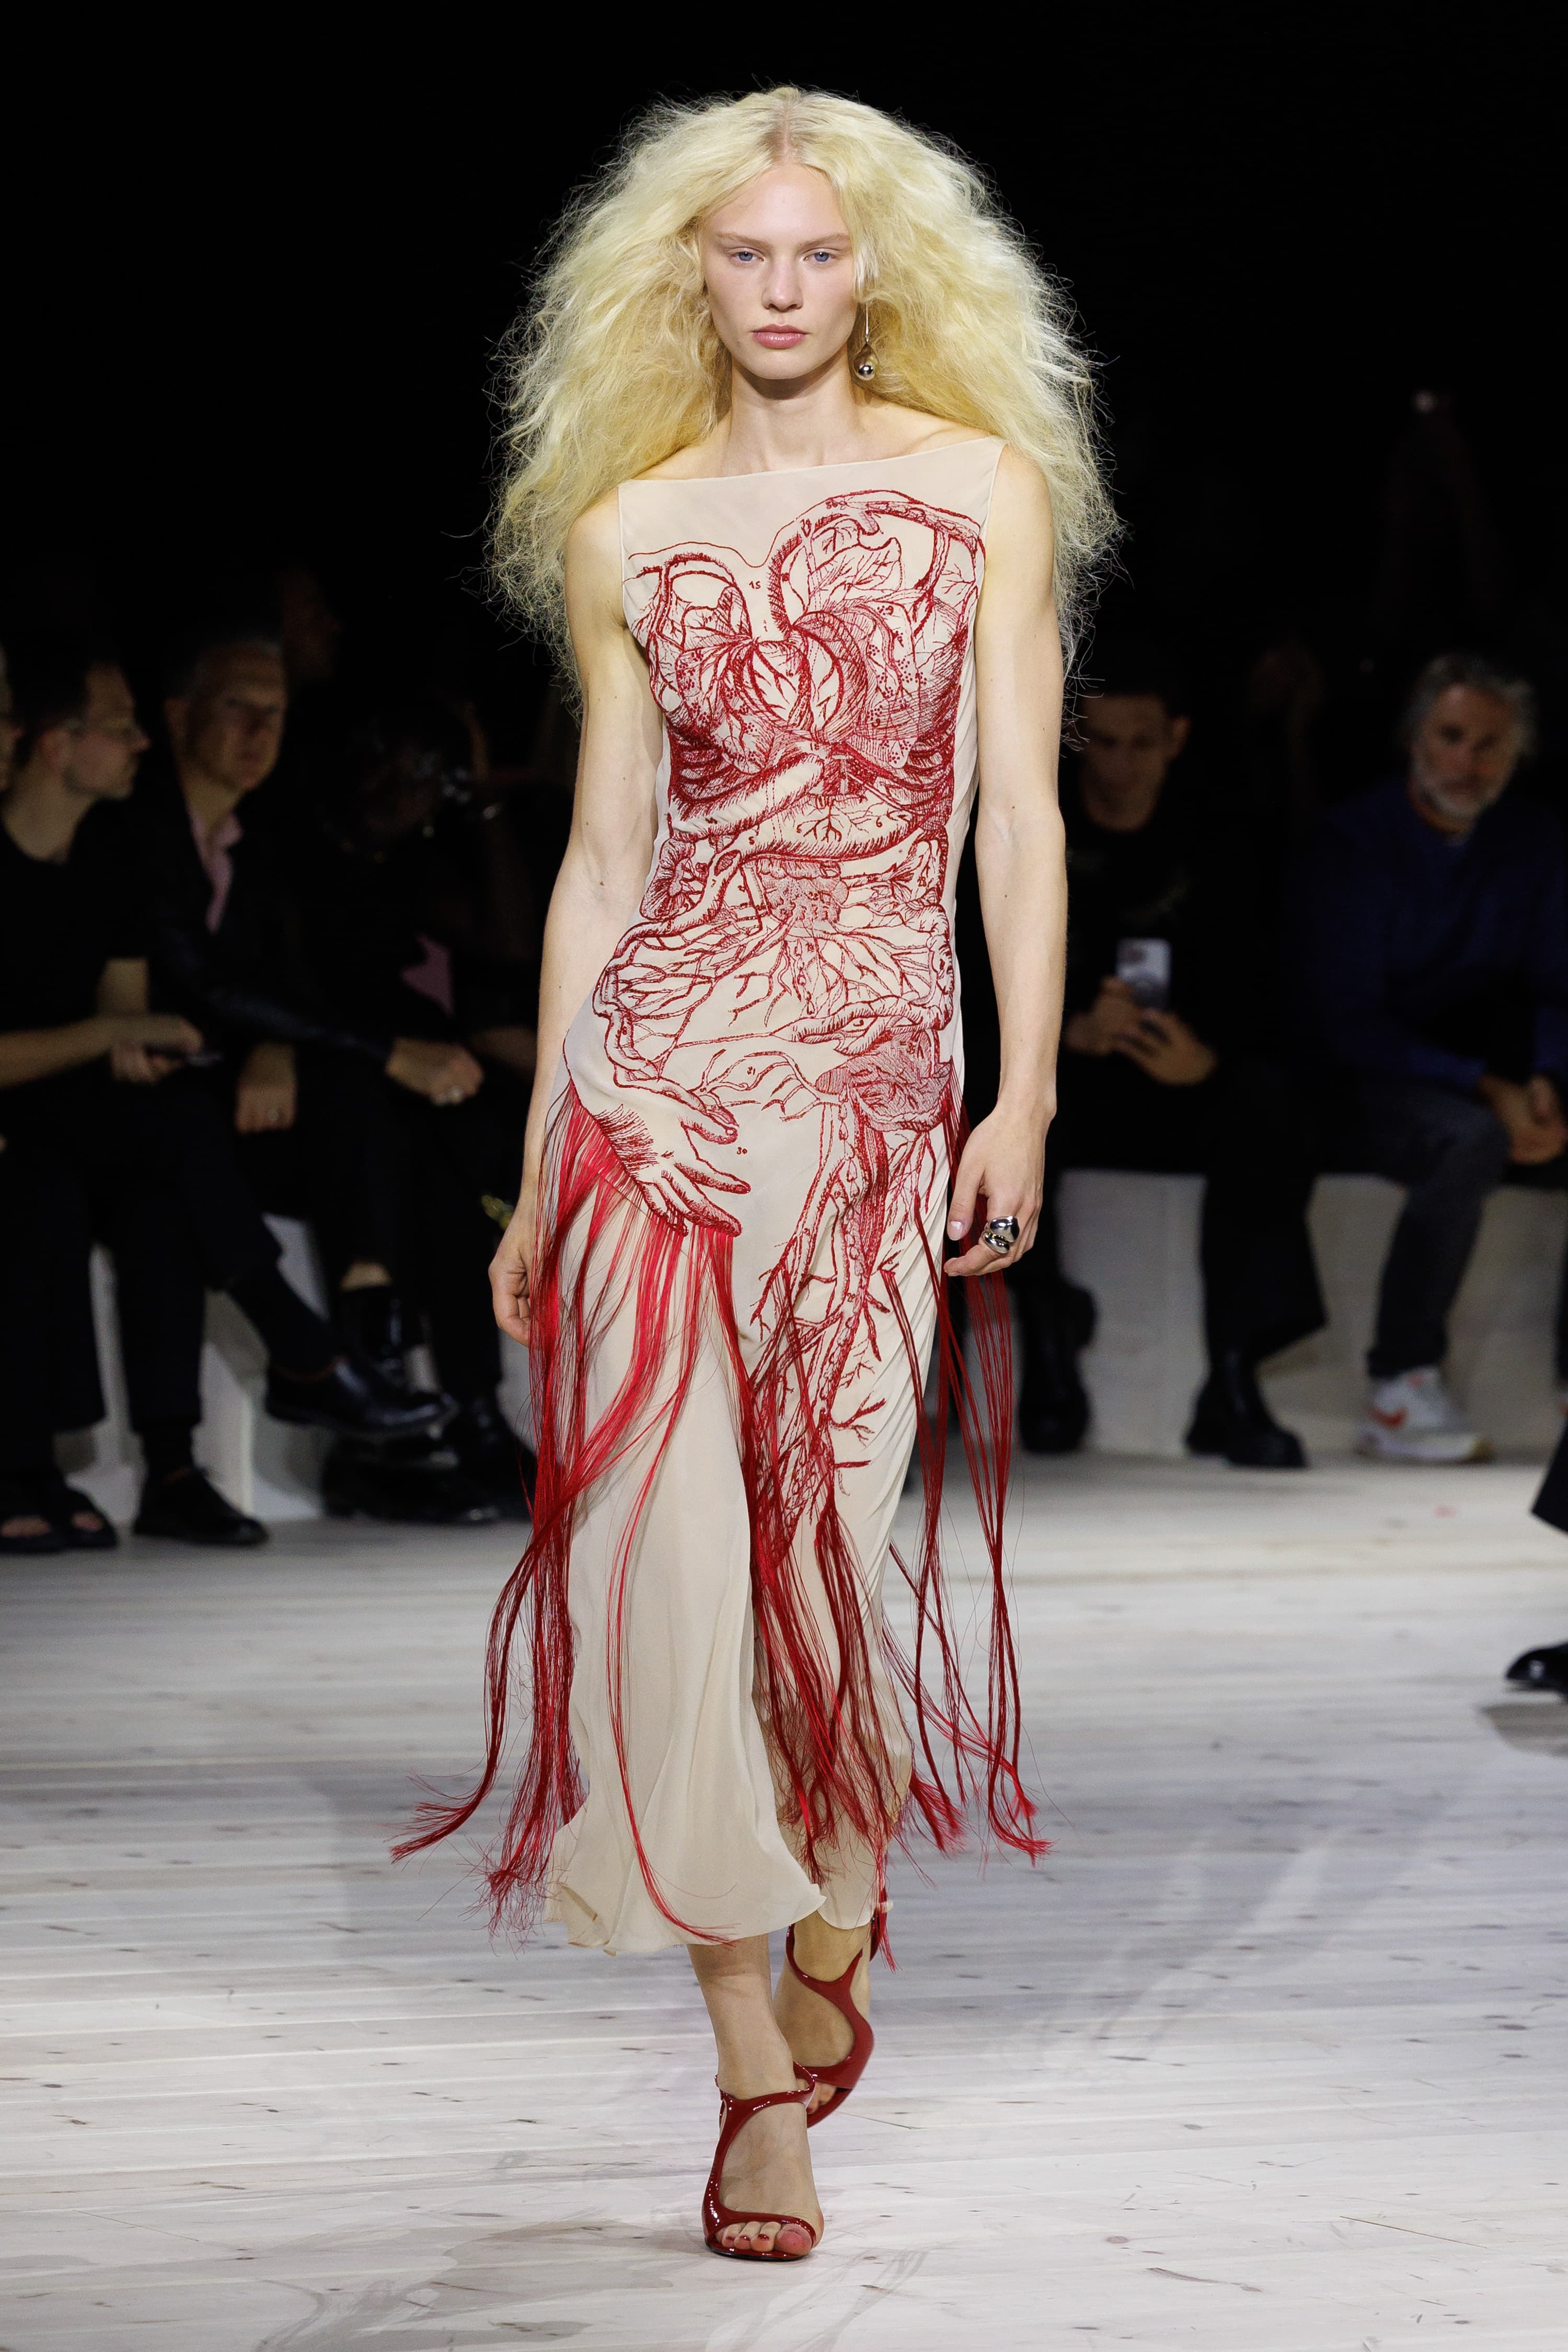 The most iconic Alexander McQueen looks by Sarah Burton